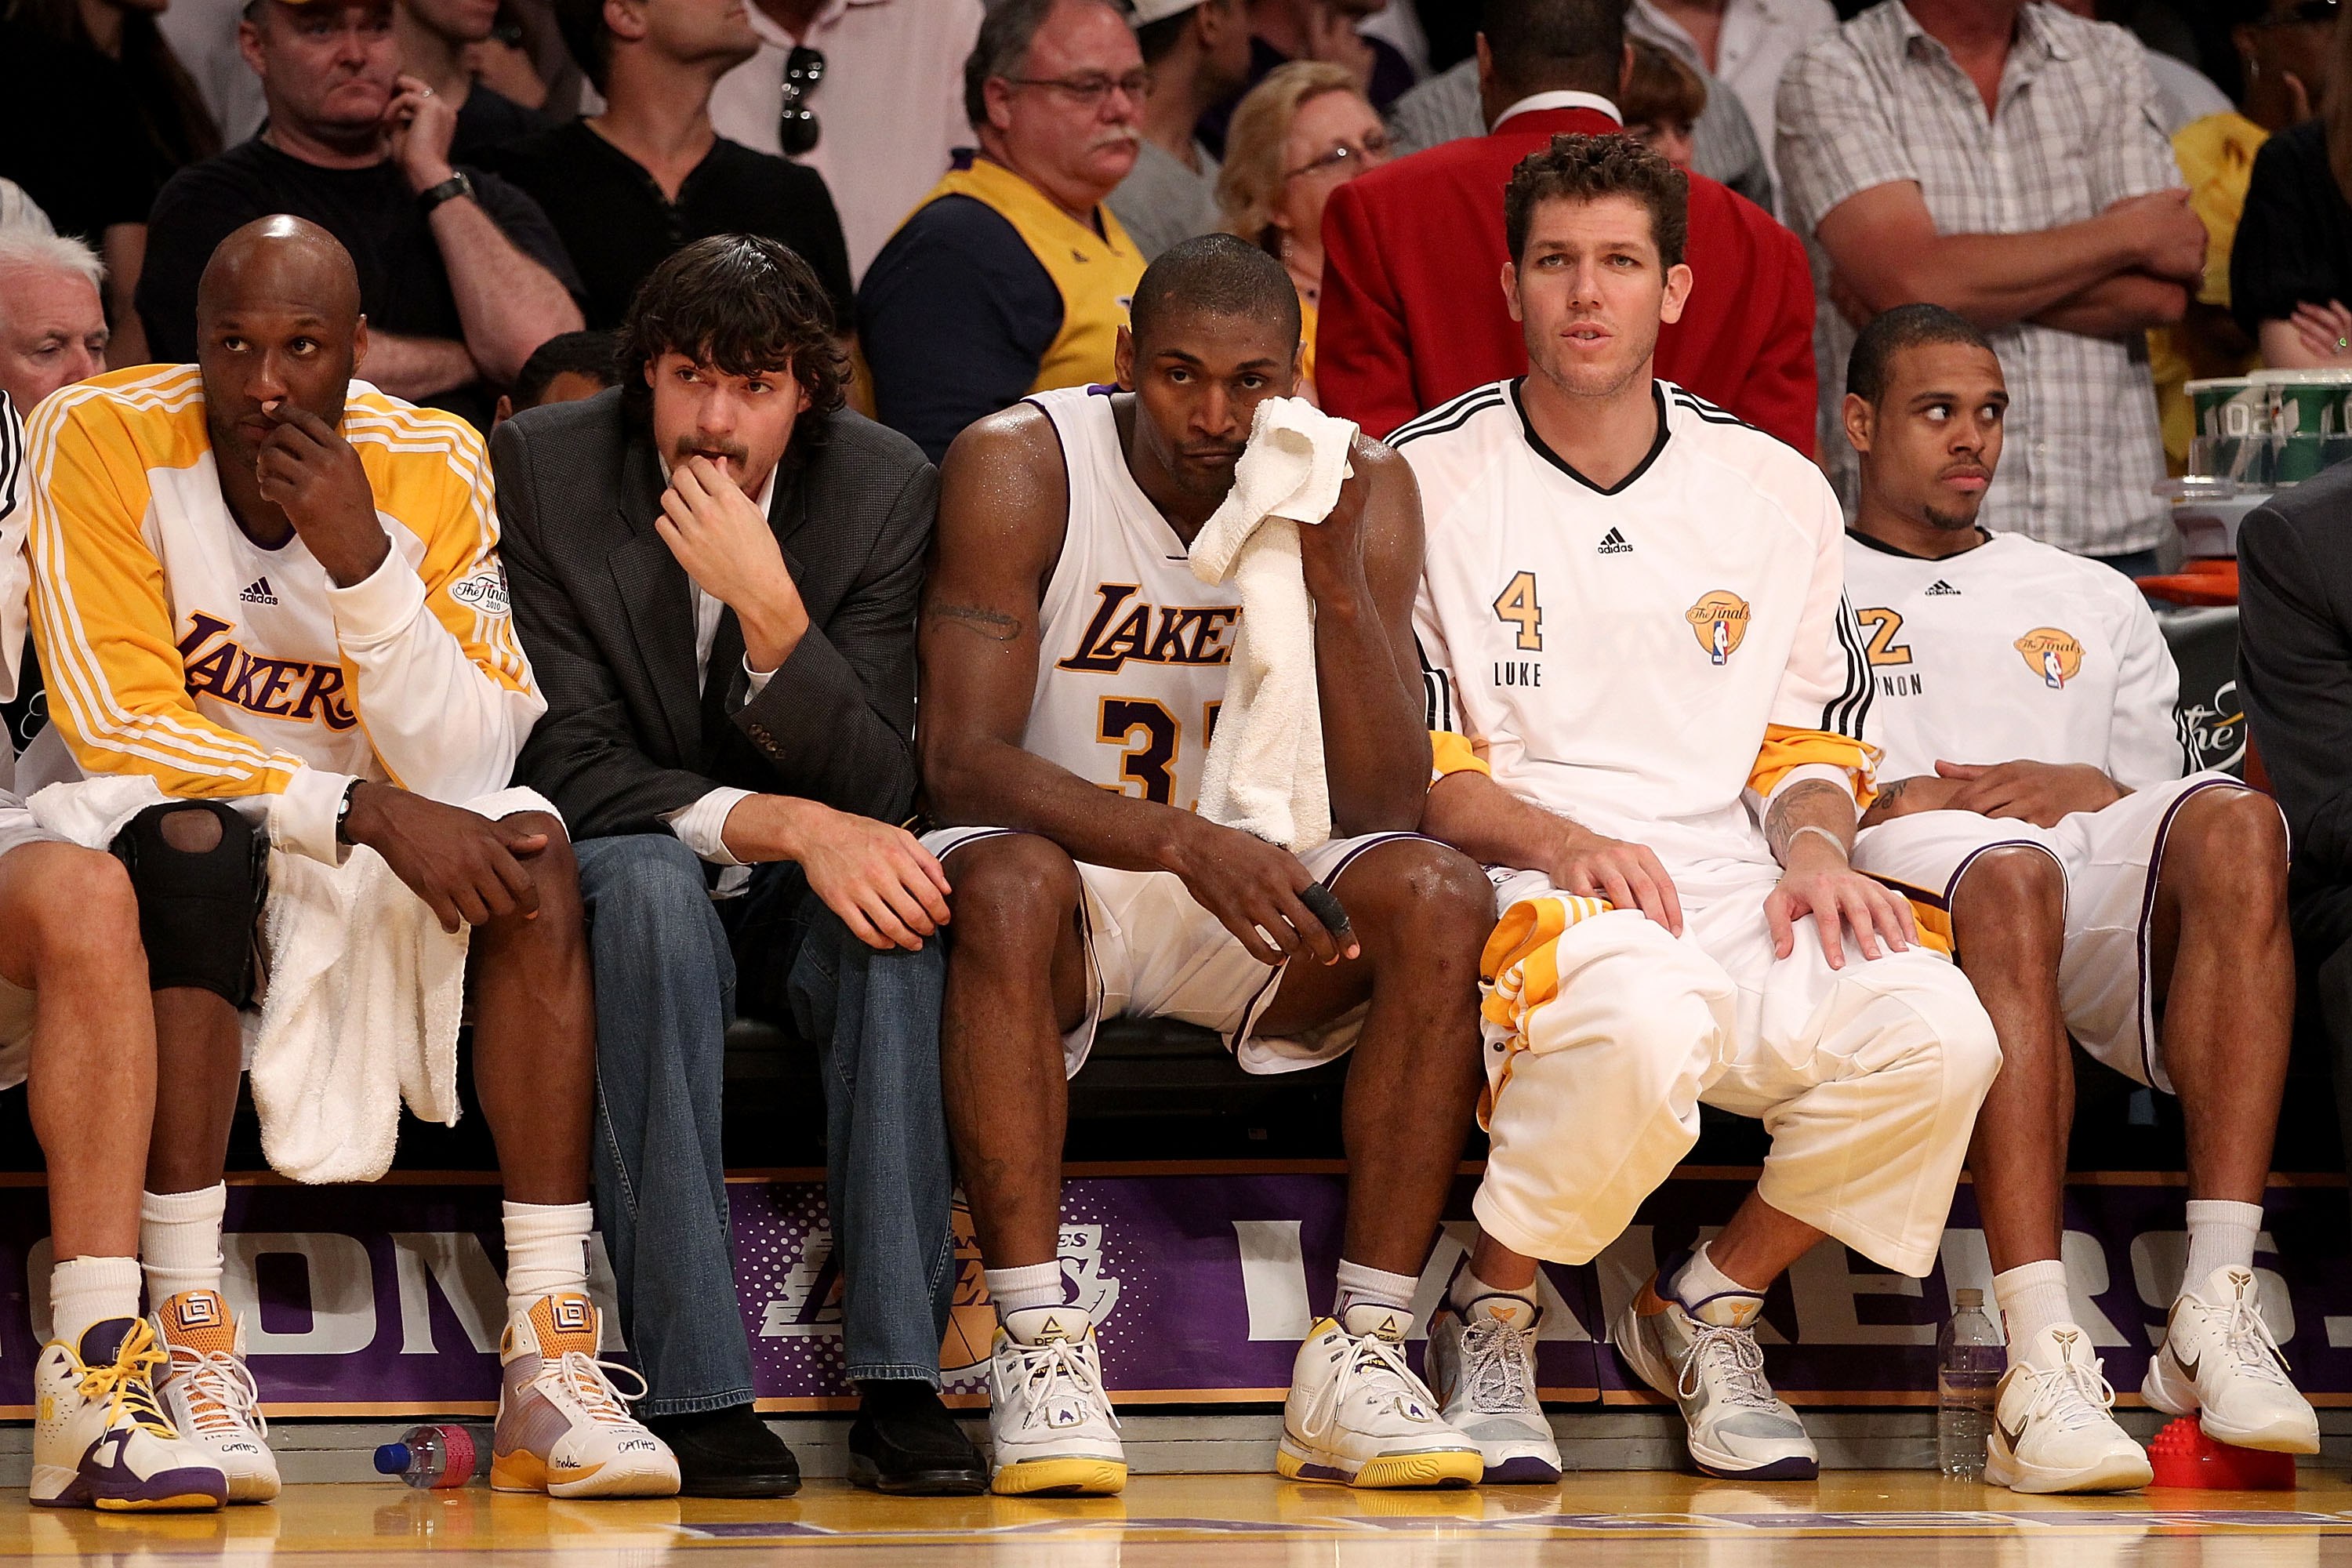 LOS ANGELES, CA - JUNE 06:  (L-R) Lamar Odom #7, Adam Morrison #6, Ron Artest #37, Luke Walton #4 and Shannon Brown #12 of the Los Angeles Lakers sit on the bench near the end of the Lakers' loss to the Boston Celtics in Game Two of the 2010 NBA Finals at